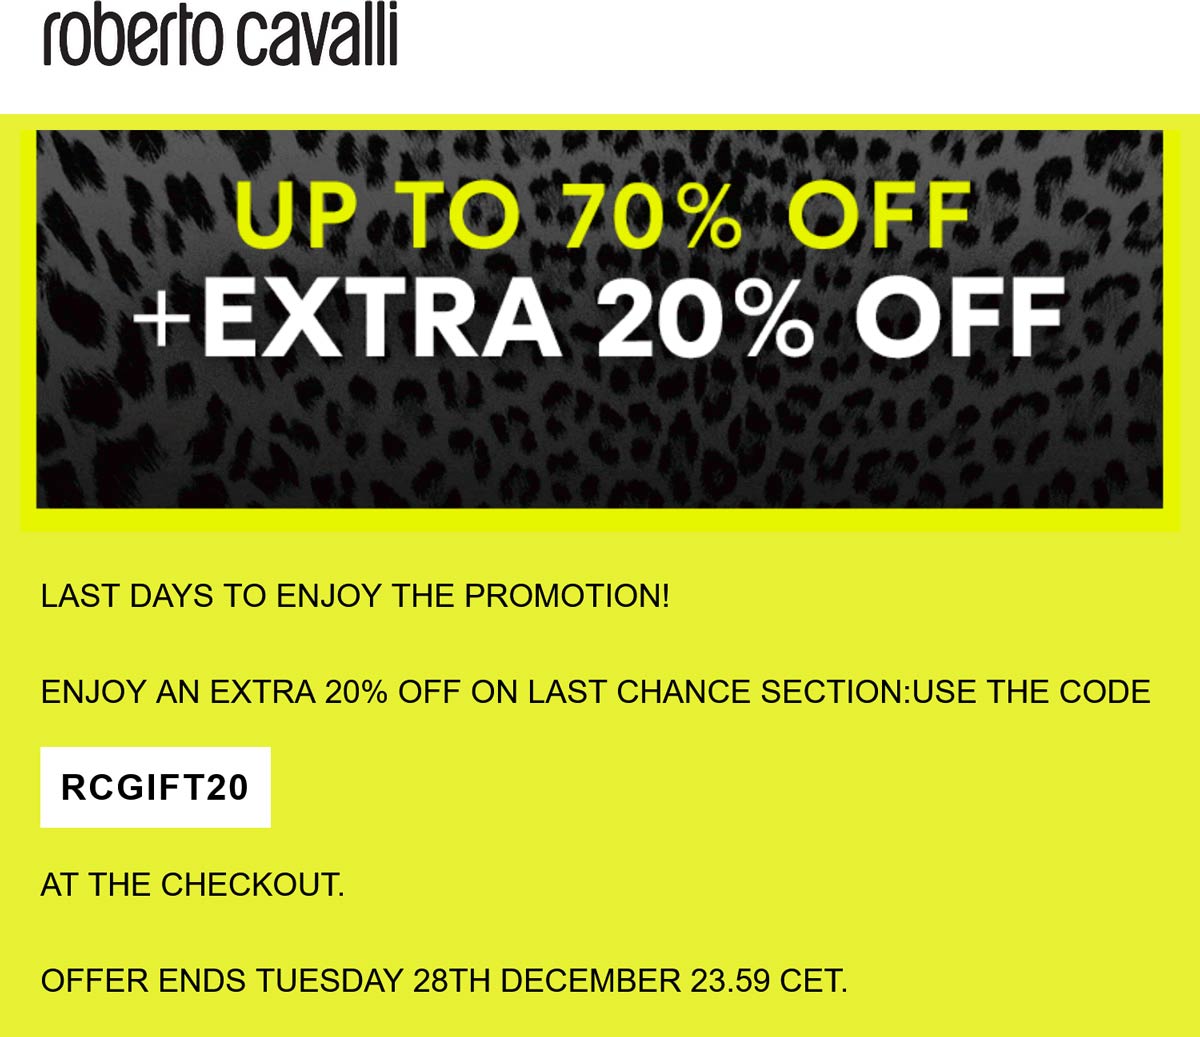 Roberto Cavalli stores Coupon  Extra 20-70% off at Roberto Cavalli via promo code RCGIFT20 #robertocavalli 